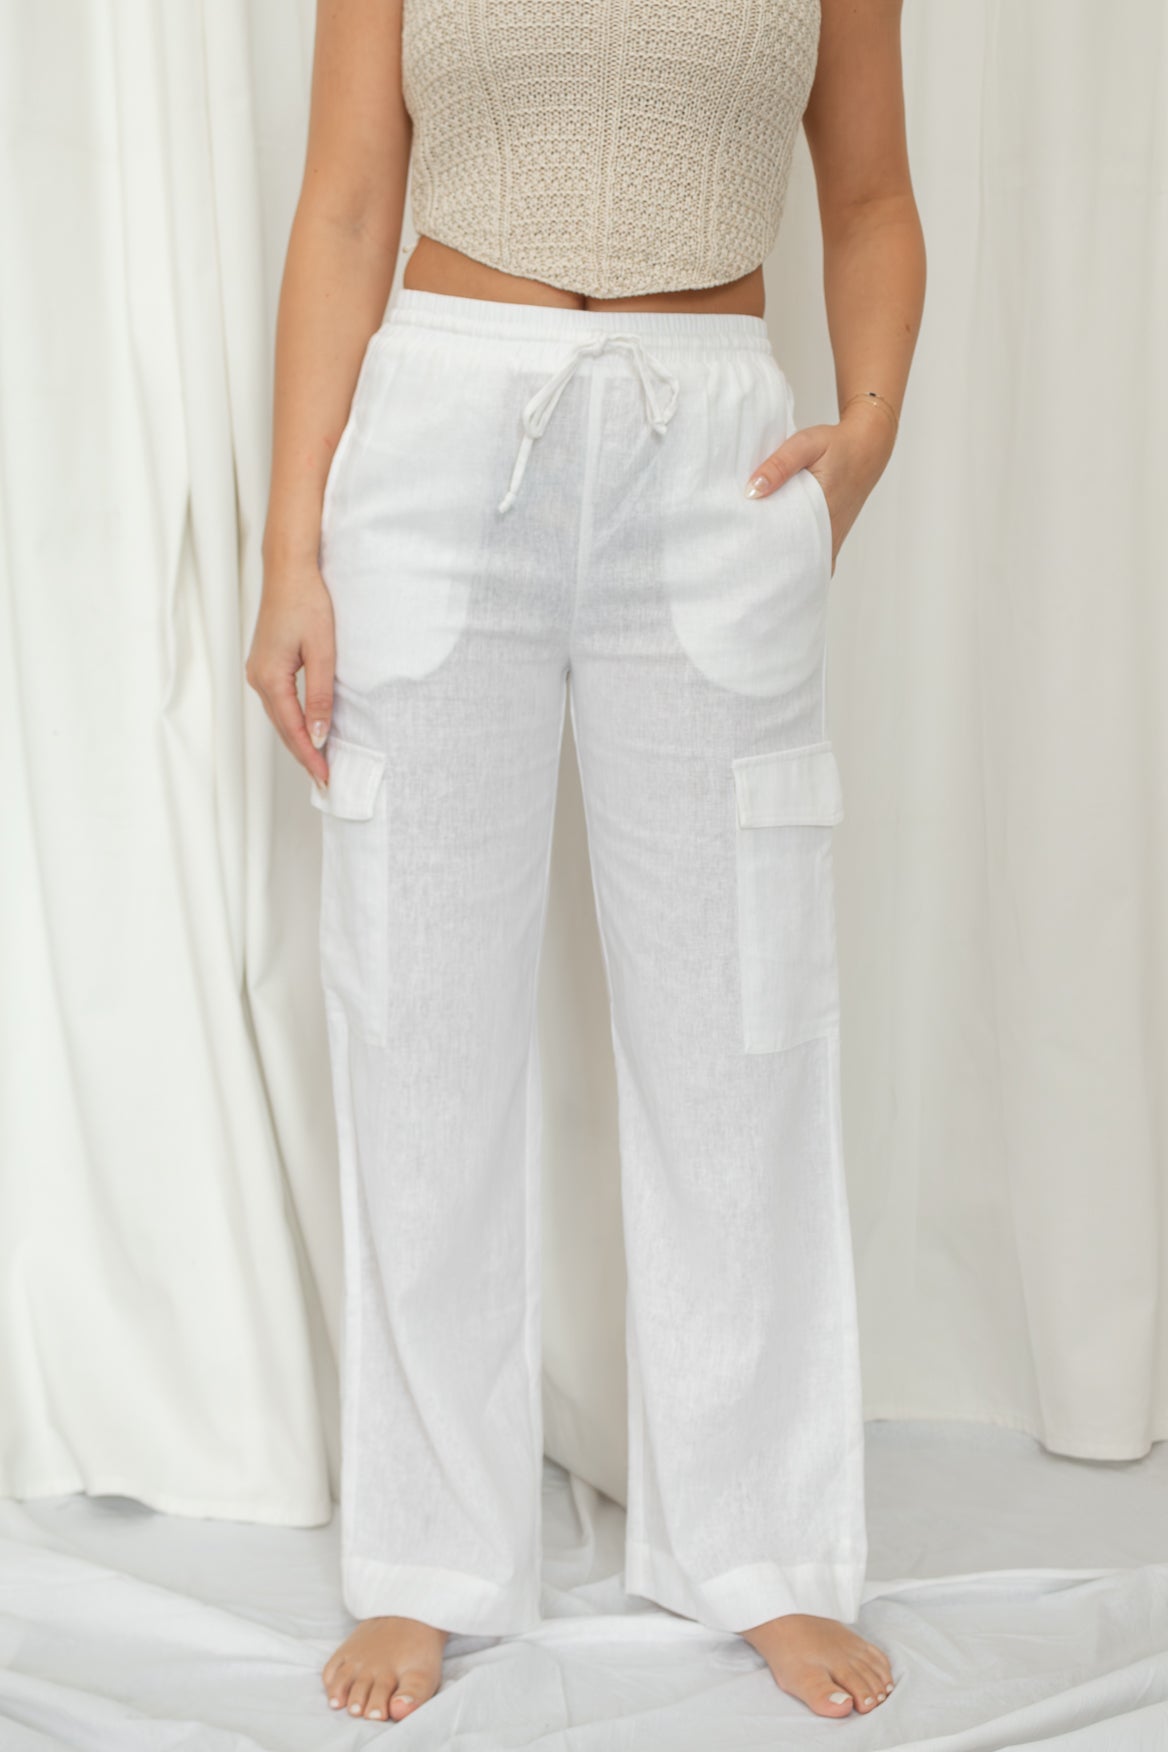 White linen pants with a drawstring waist